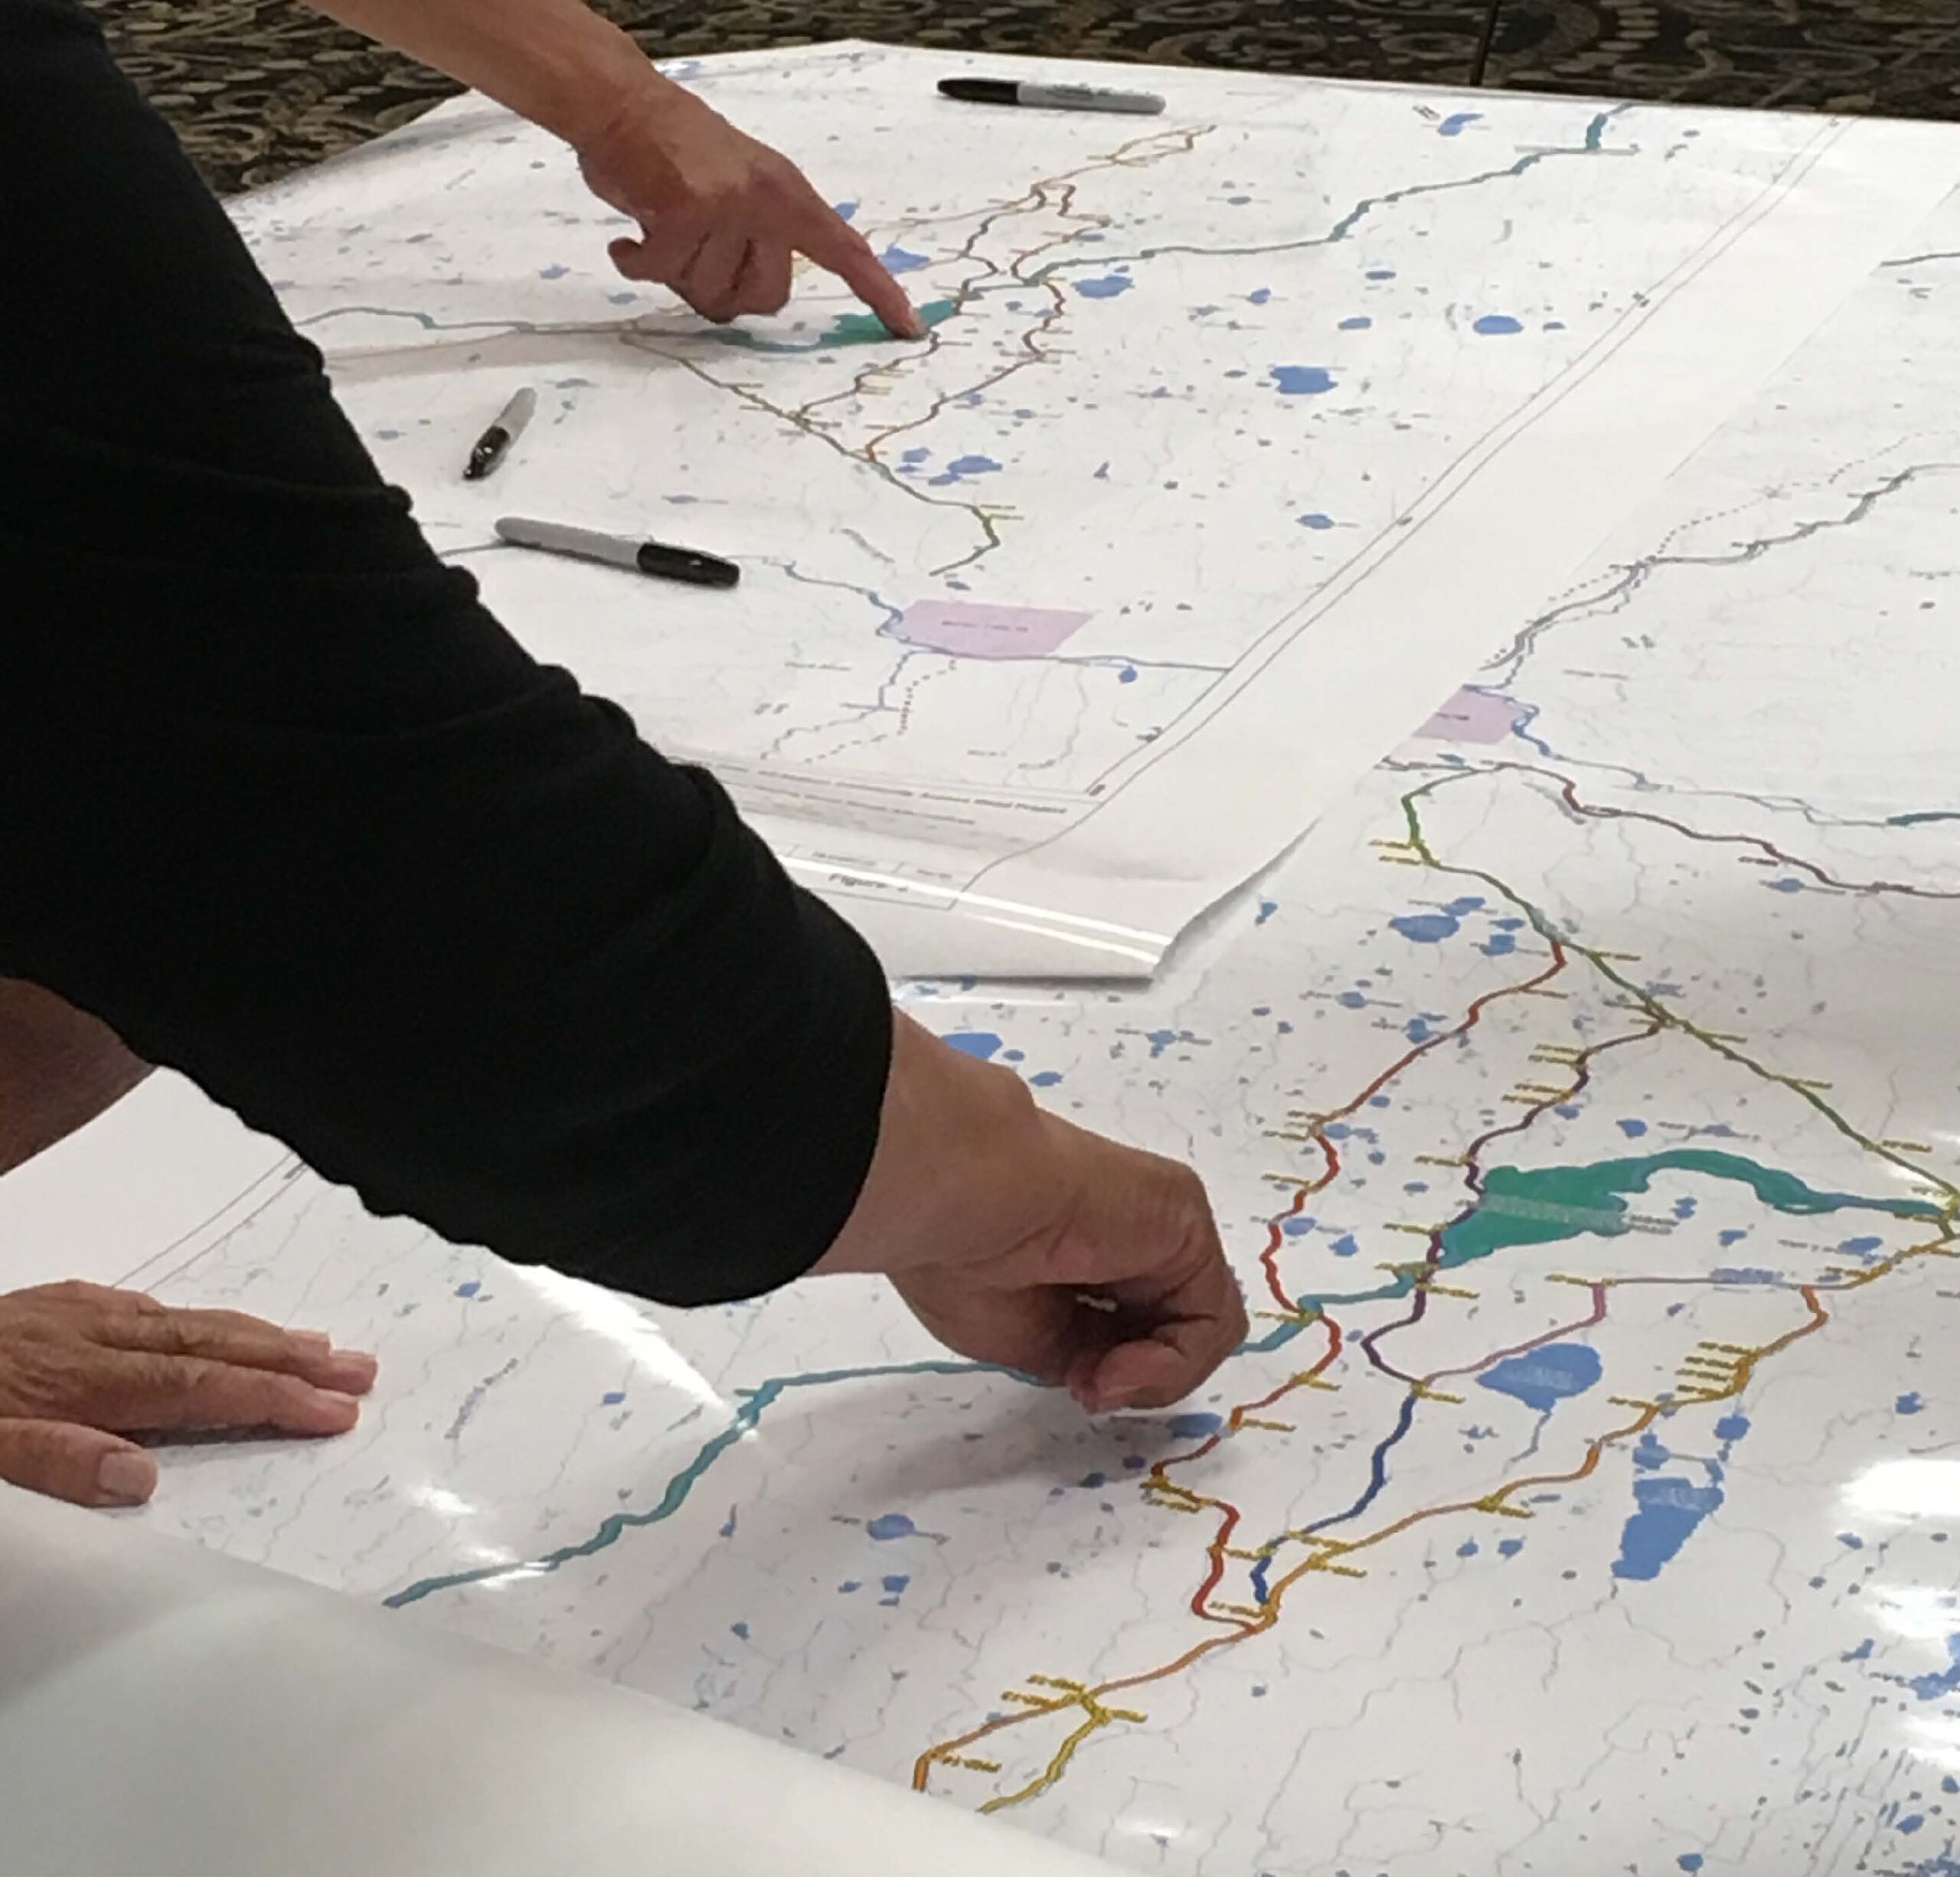 A photo of a person pointing at a map of the Marten Falls area.